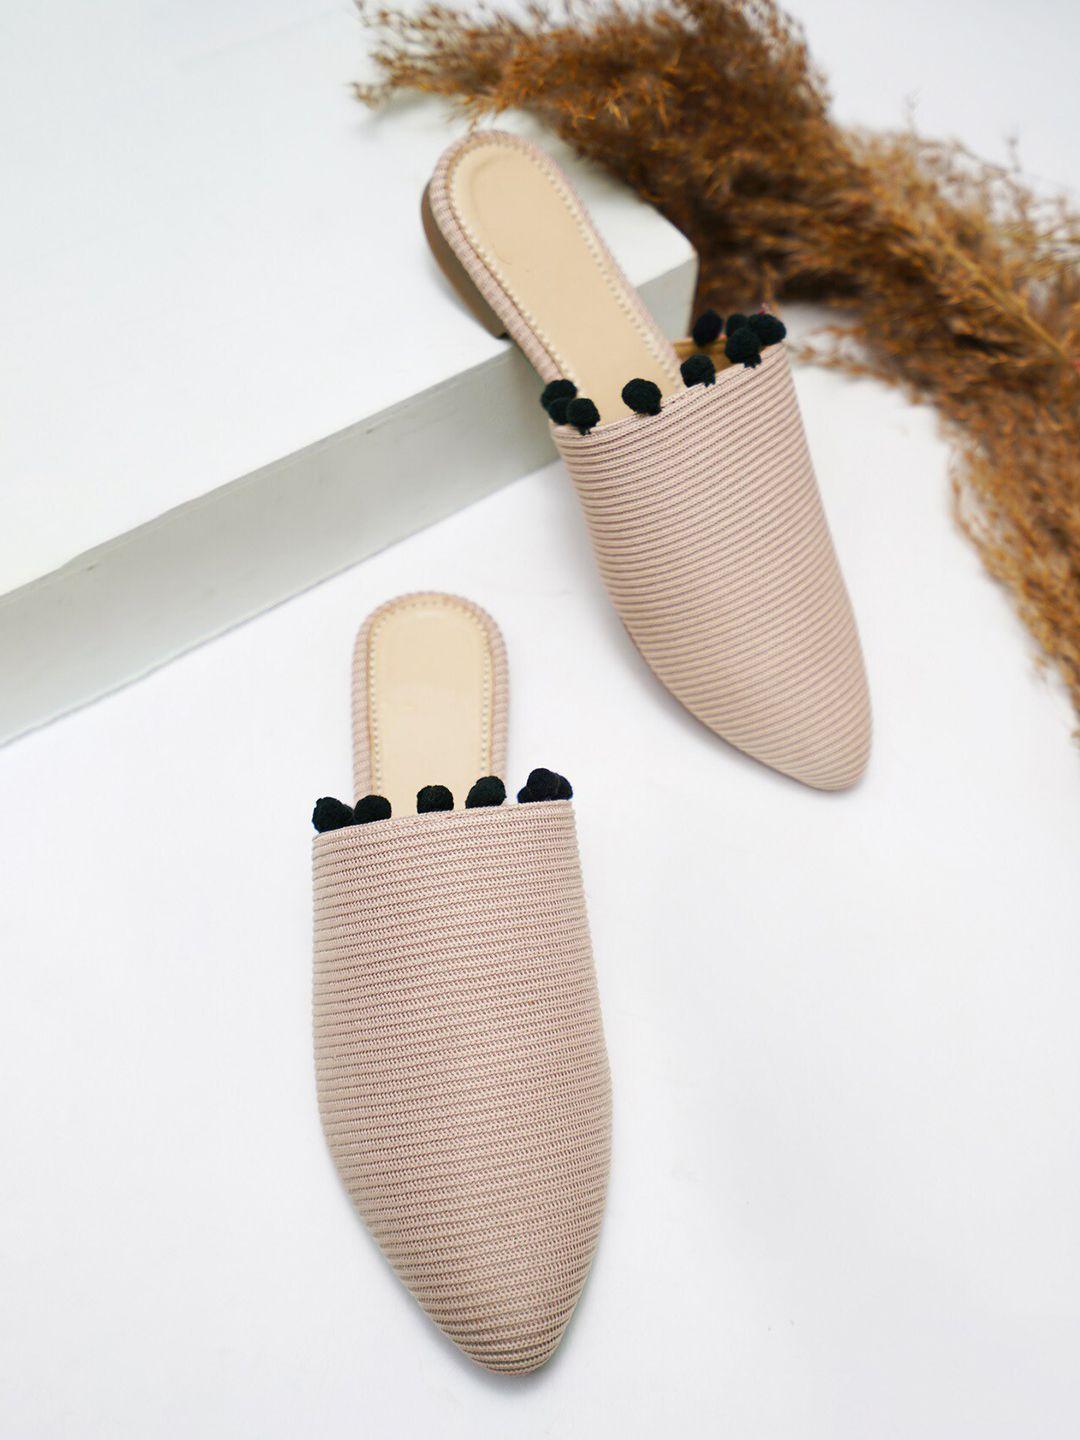 try me textured pom- pom embellished pointed toe mules